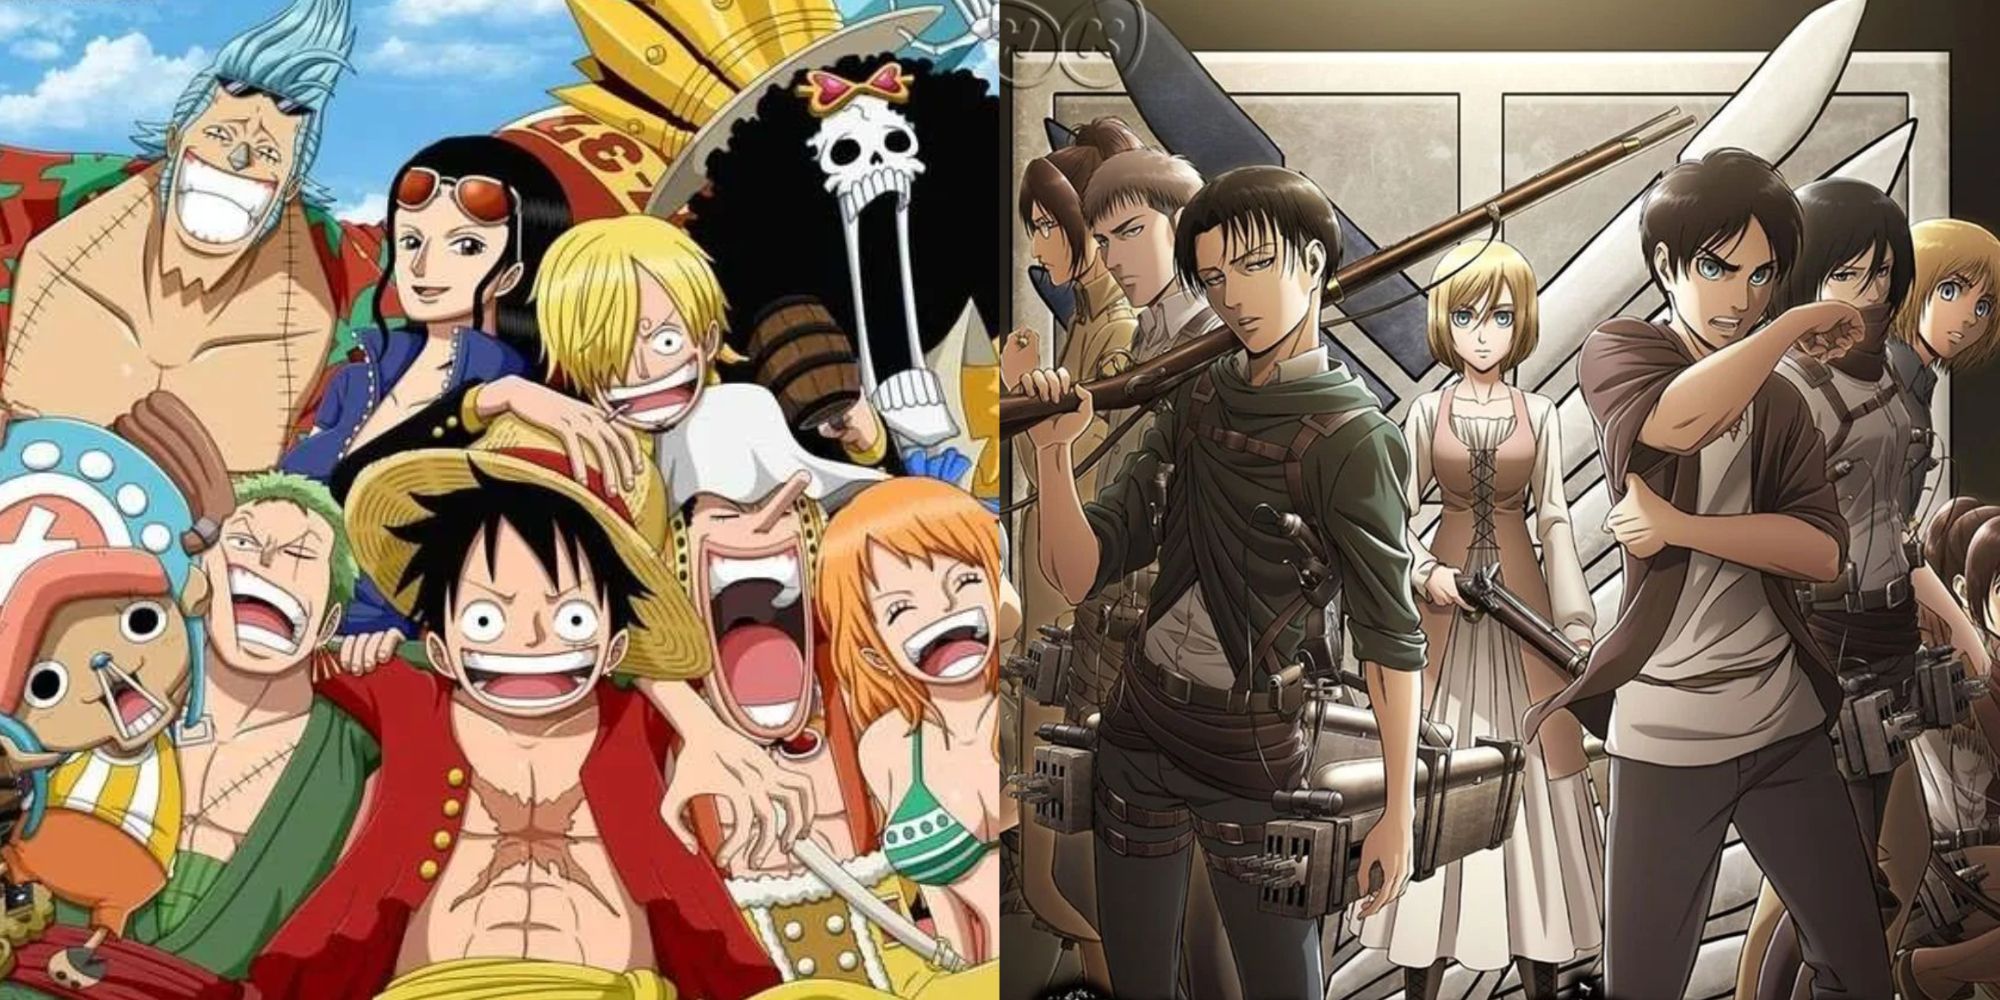 The ensemble casts of One Piece and Attack on Titan